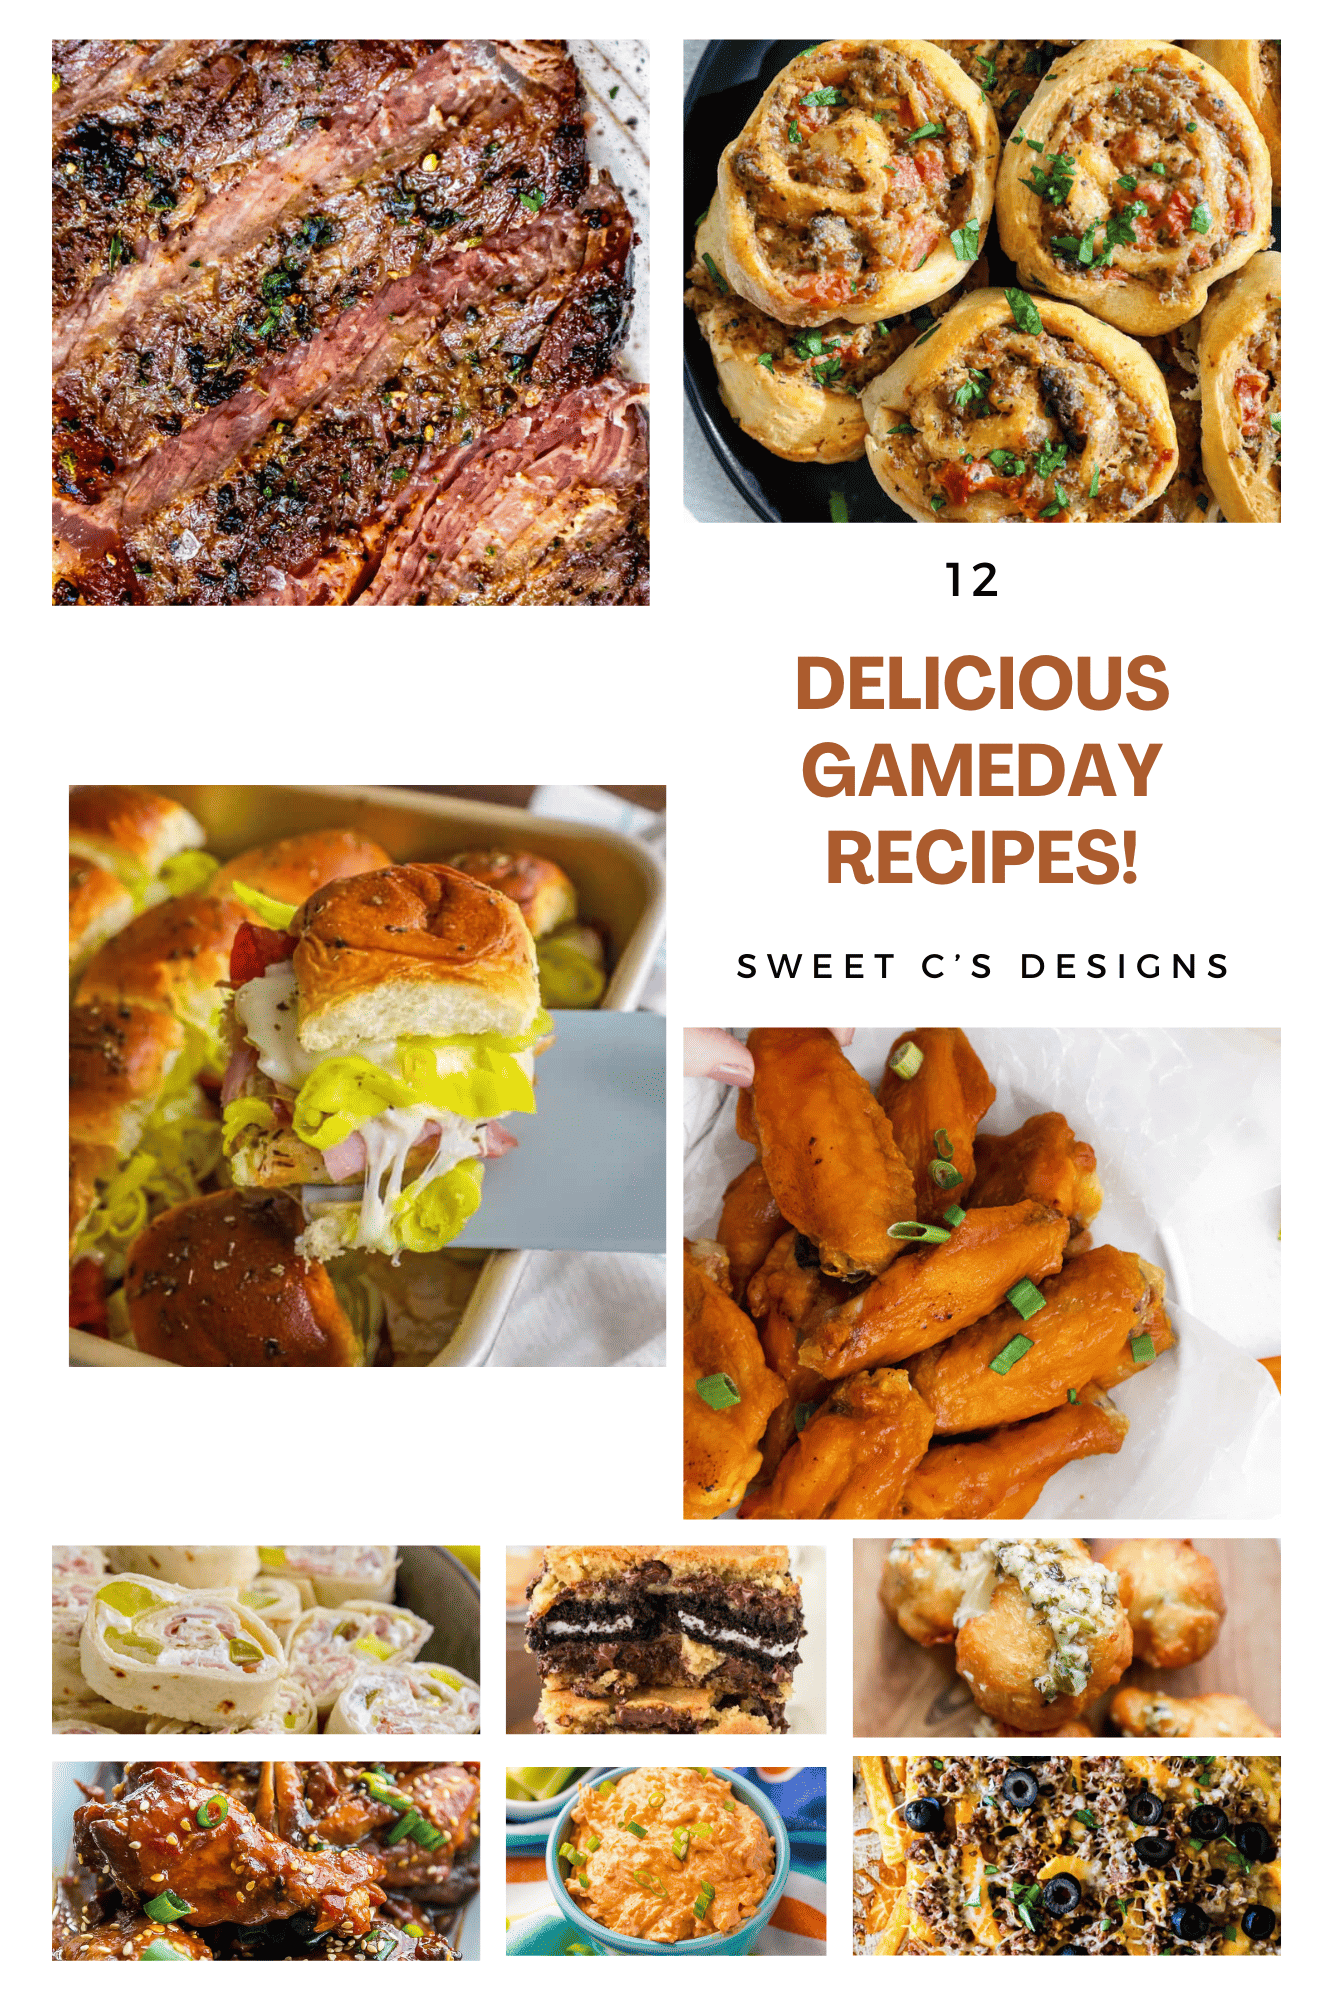 Indulge in 17 mouthwatering sweet designs perfect for gameday.